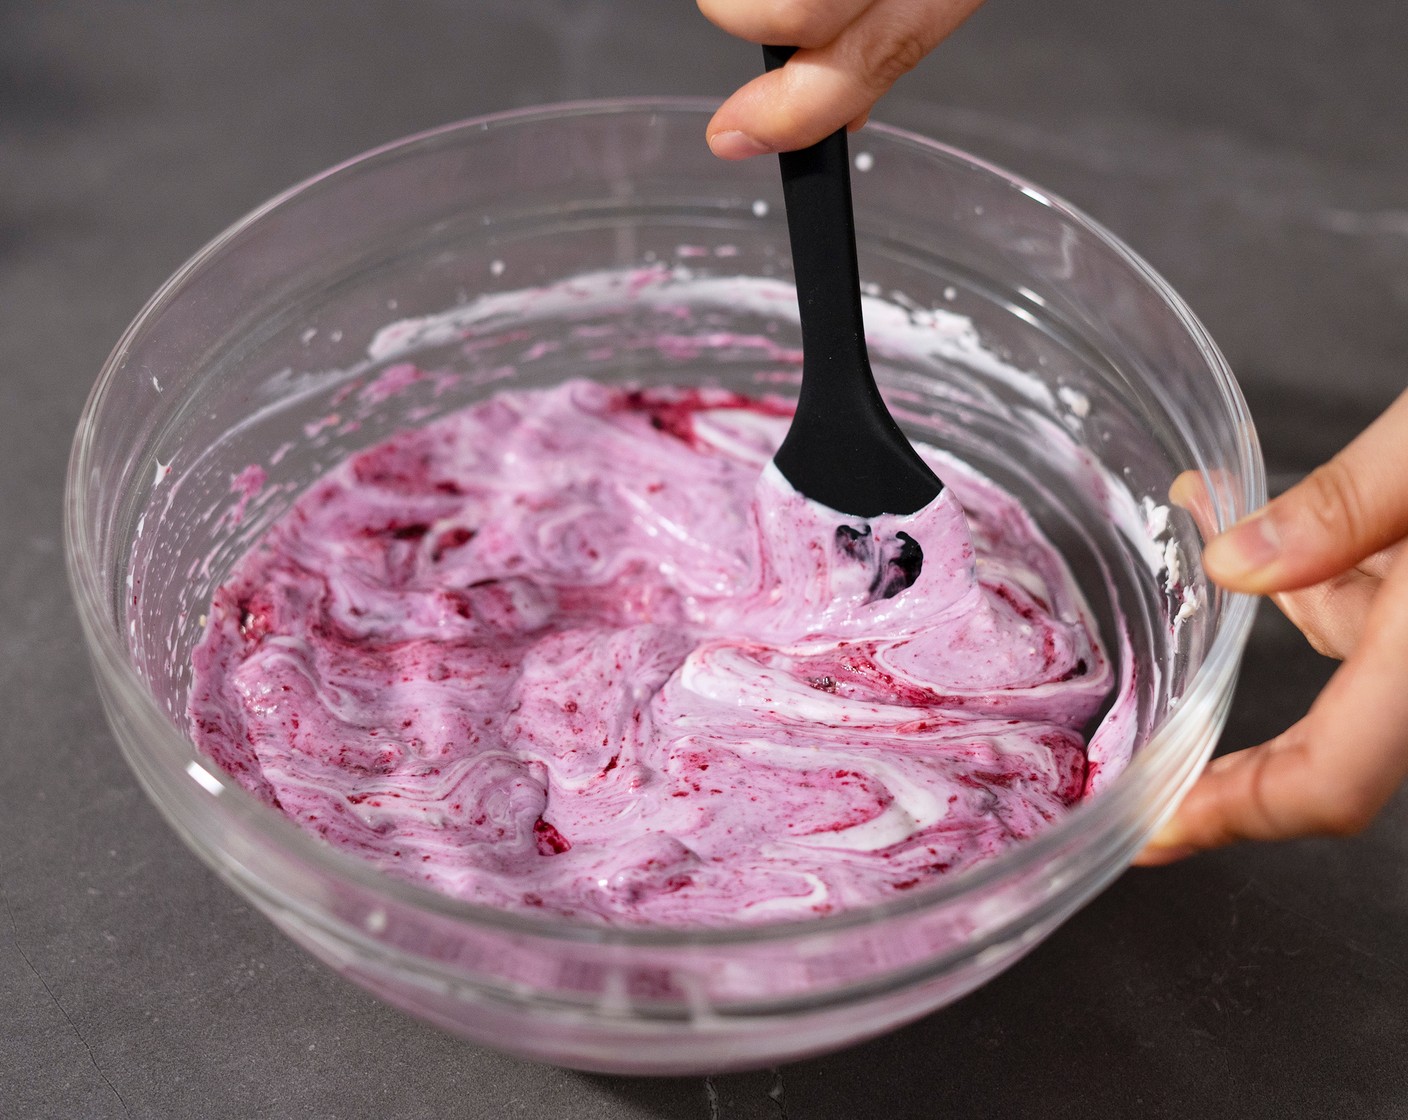 step 6 Mix the blueberry sauce with the cheesecake mixture together, until partially combined. Spread the mixture into an even layer. Cover with plastic wrap or foil, and keep in the freezer for at least 4 hours.